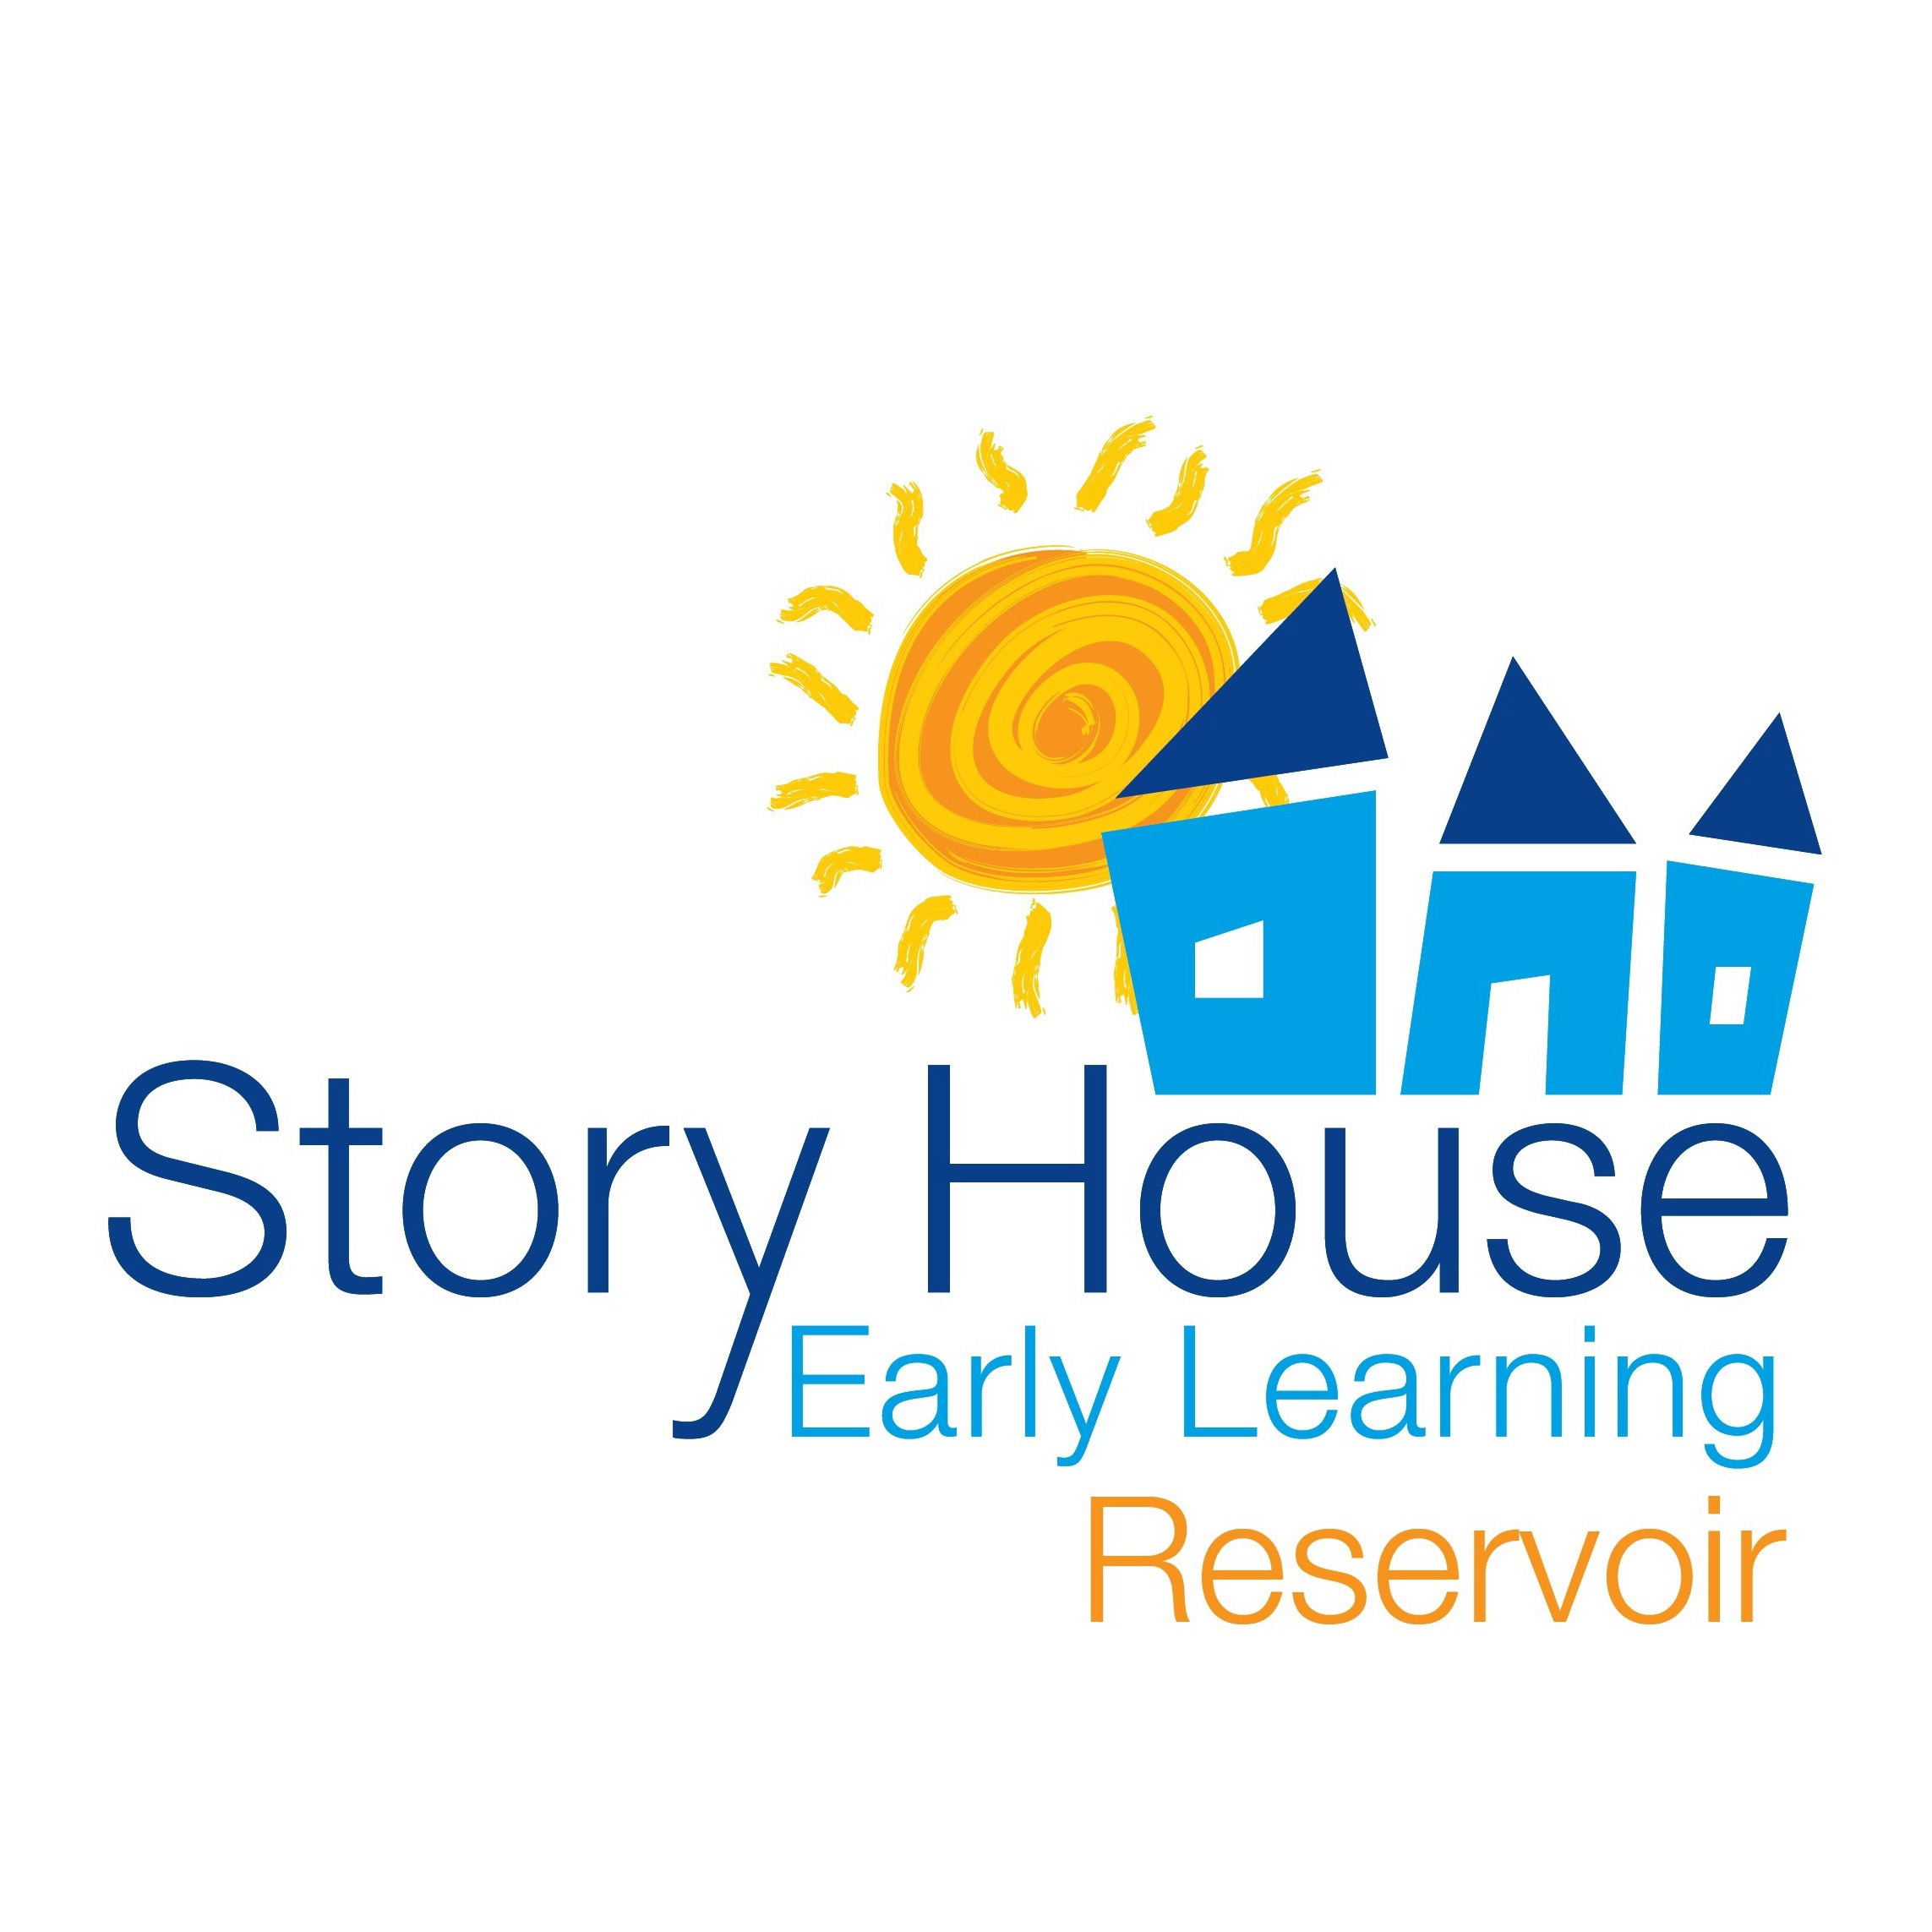 Story House Early Learning Reservoir